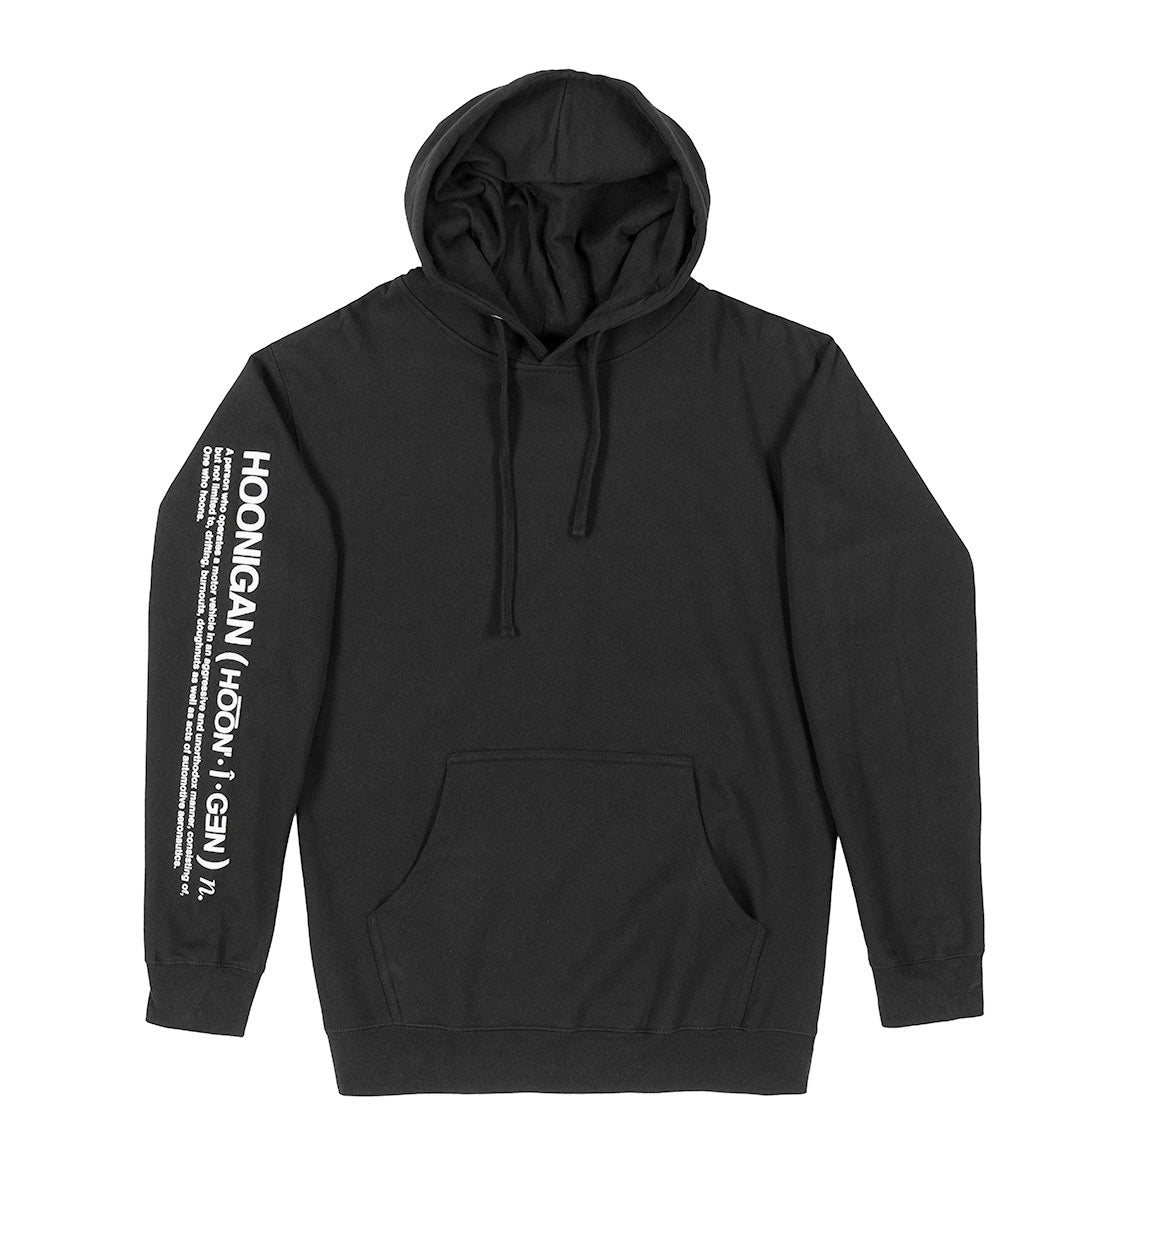 DEFINITION Pullover Hoodie